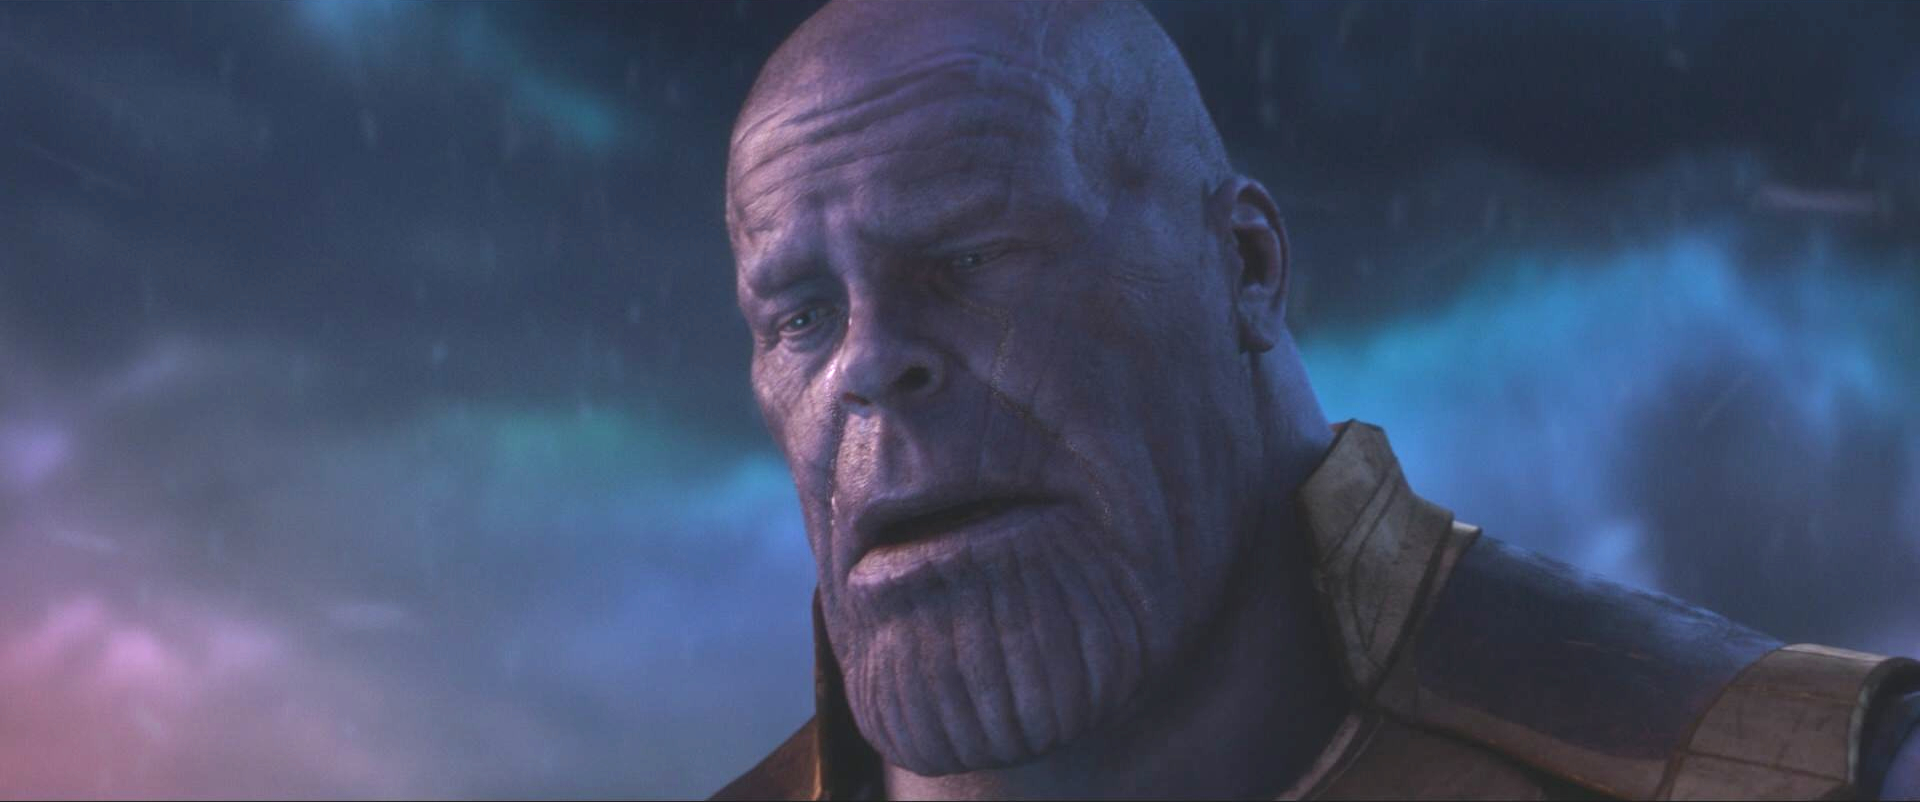 Thanos Offered Fake Love in 'Avengers: Infinity War'